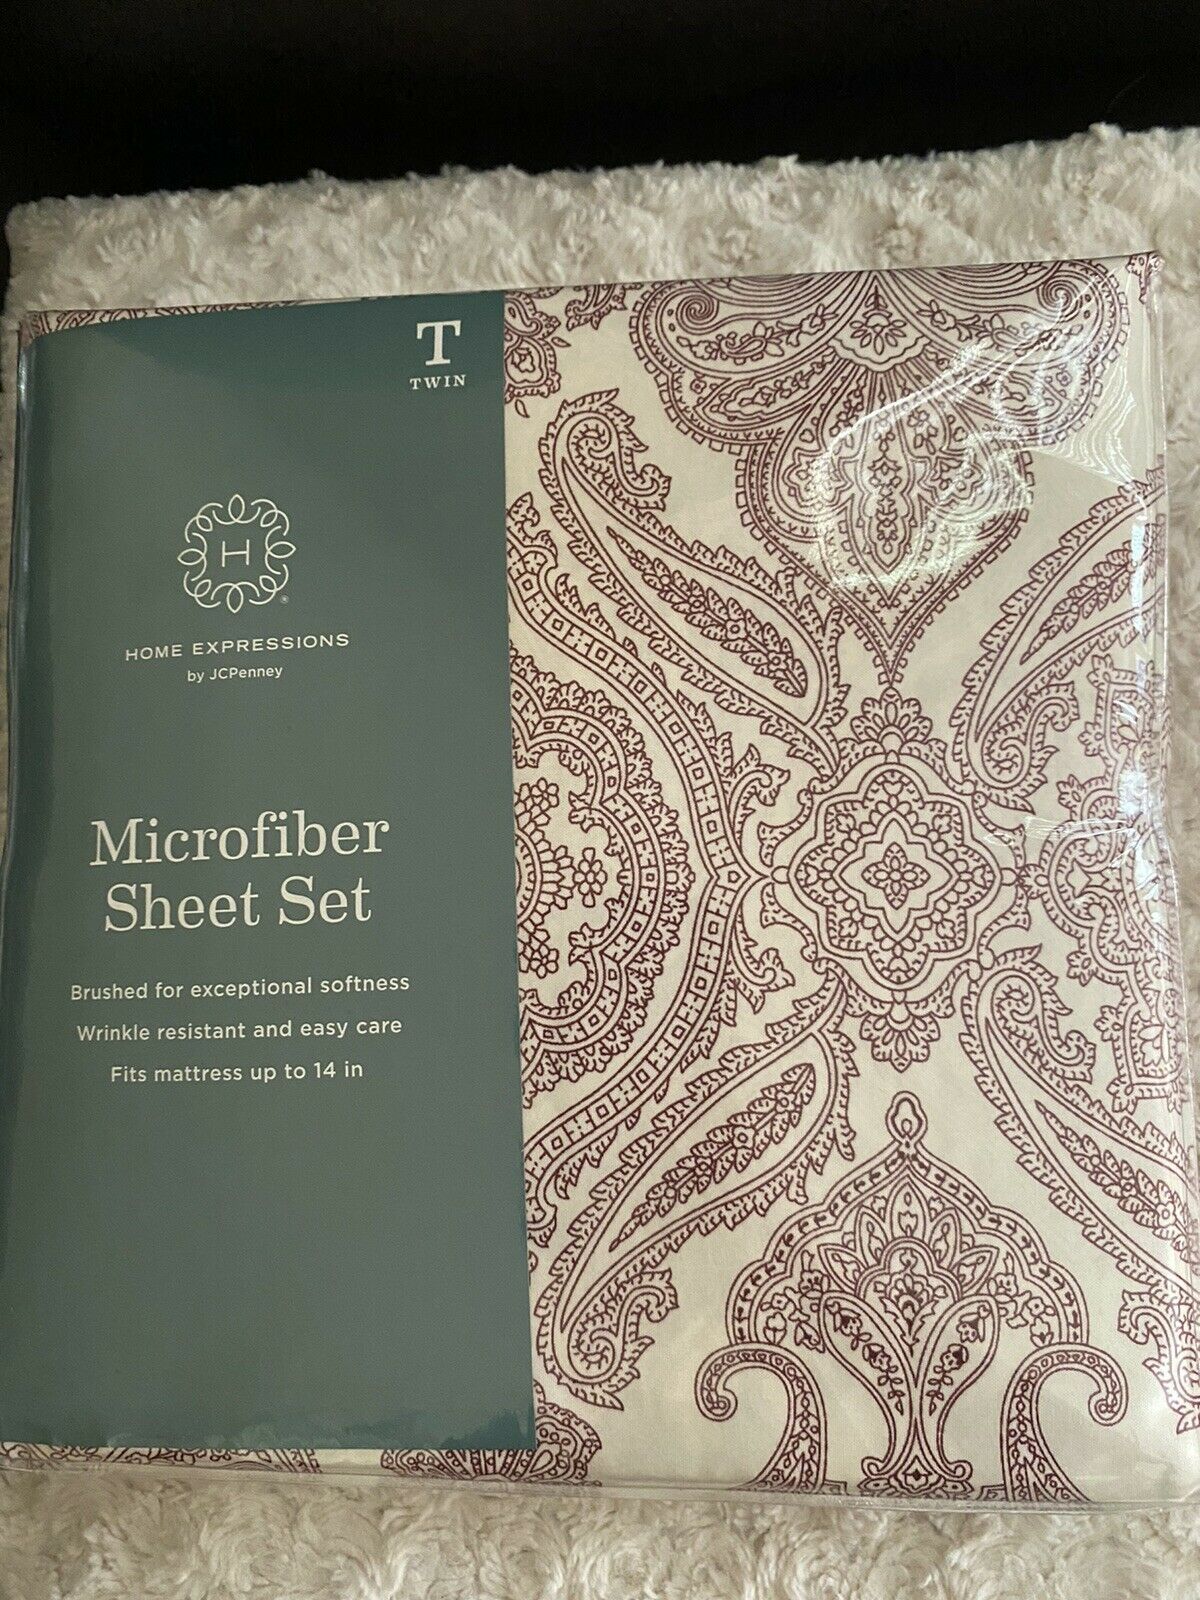 JC Penney Home Expressions Microfiber Twin Sheet Set NWT $30